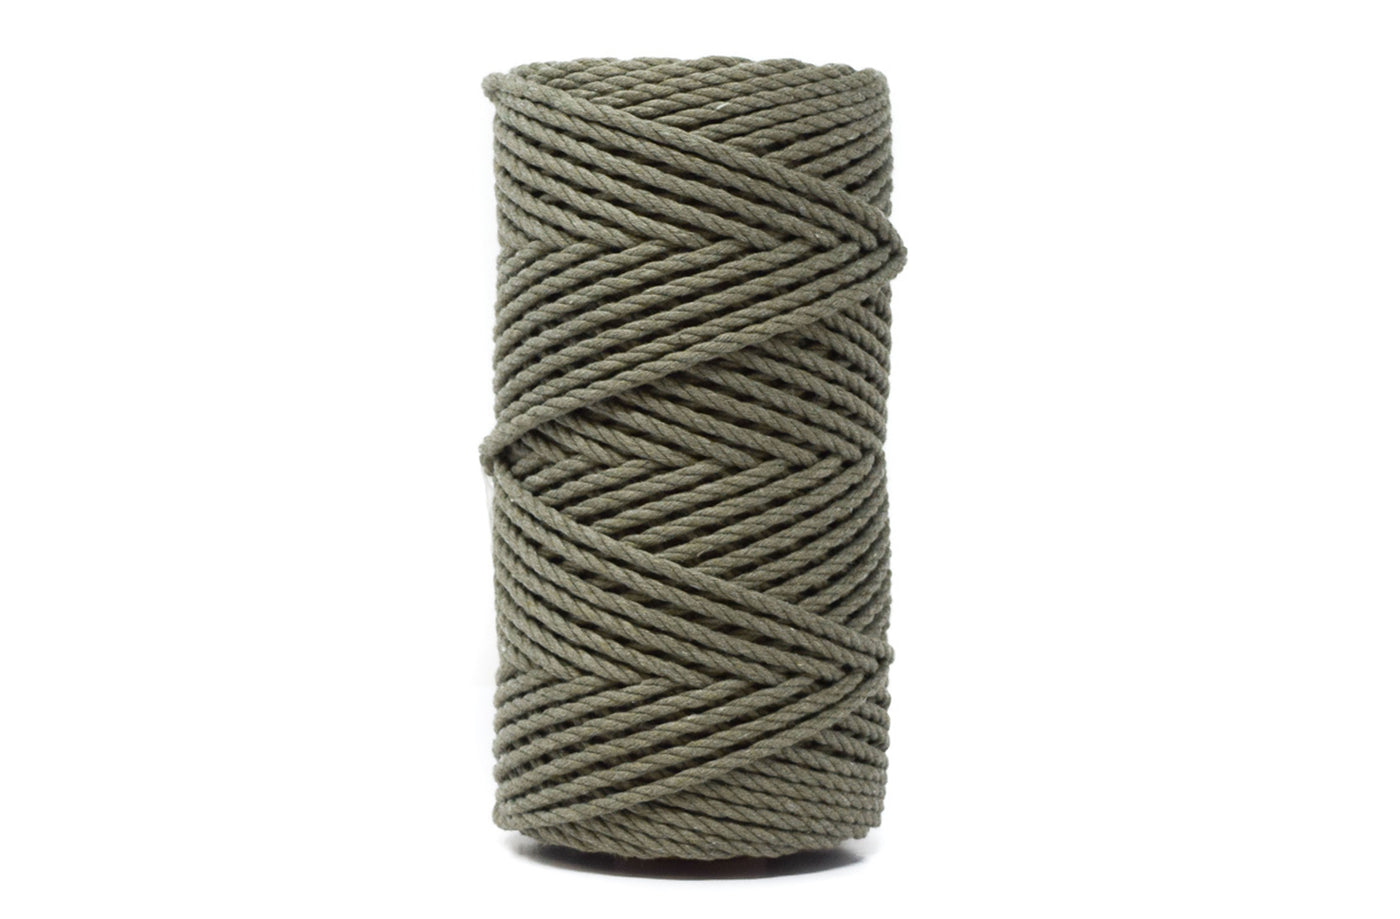 COTTON ROPE ZERO WASTE 3 MM - 3 PLY - BAY LEAF COLOR